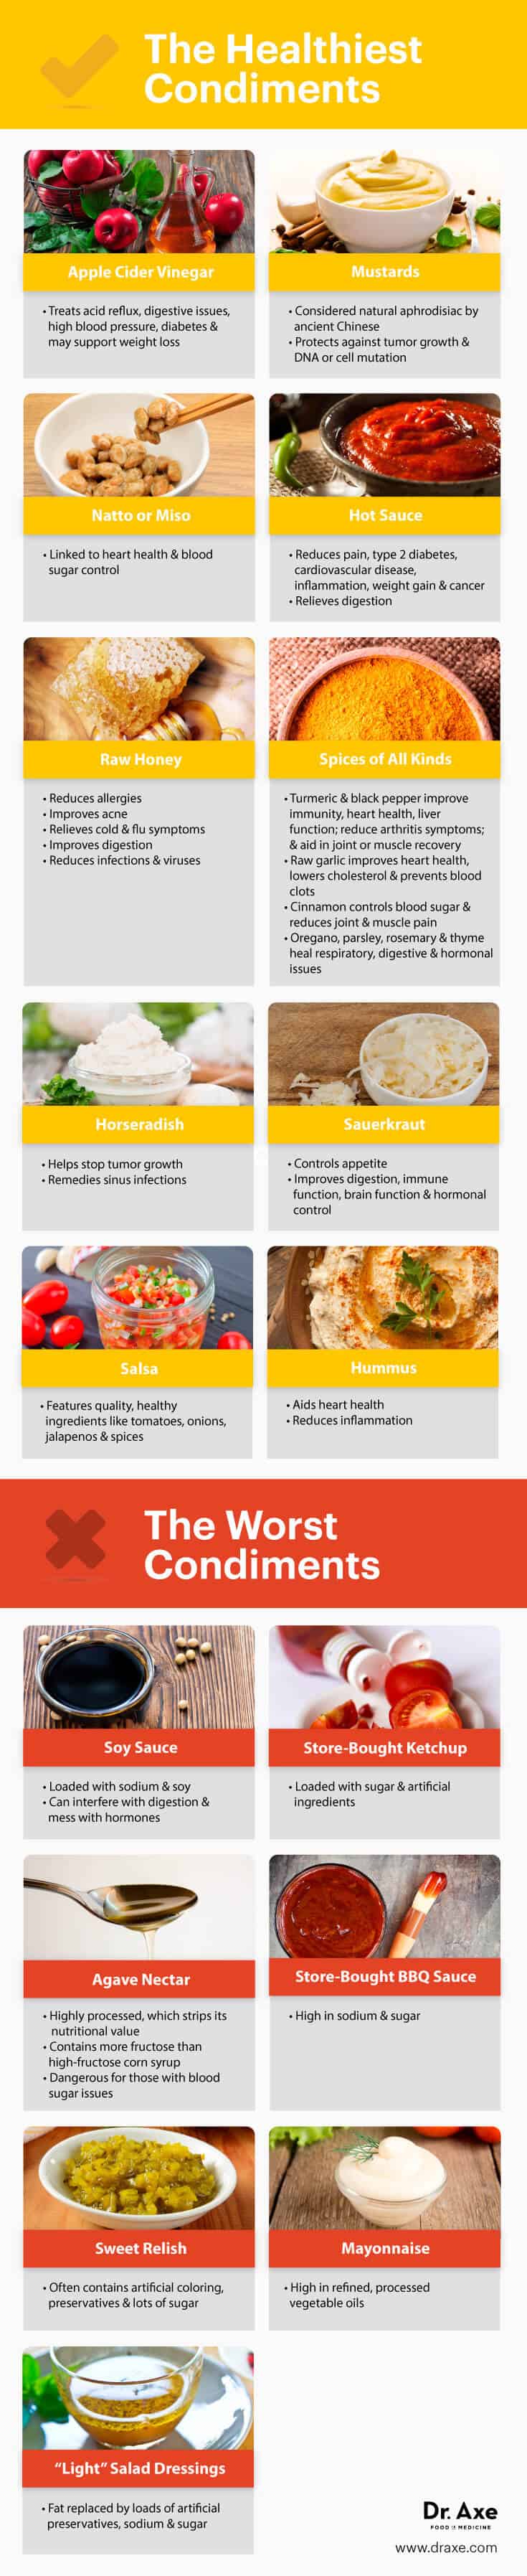 The best and worst condiments - Dr. Axe